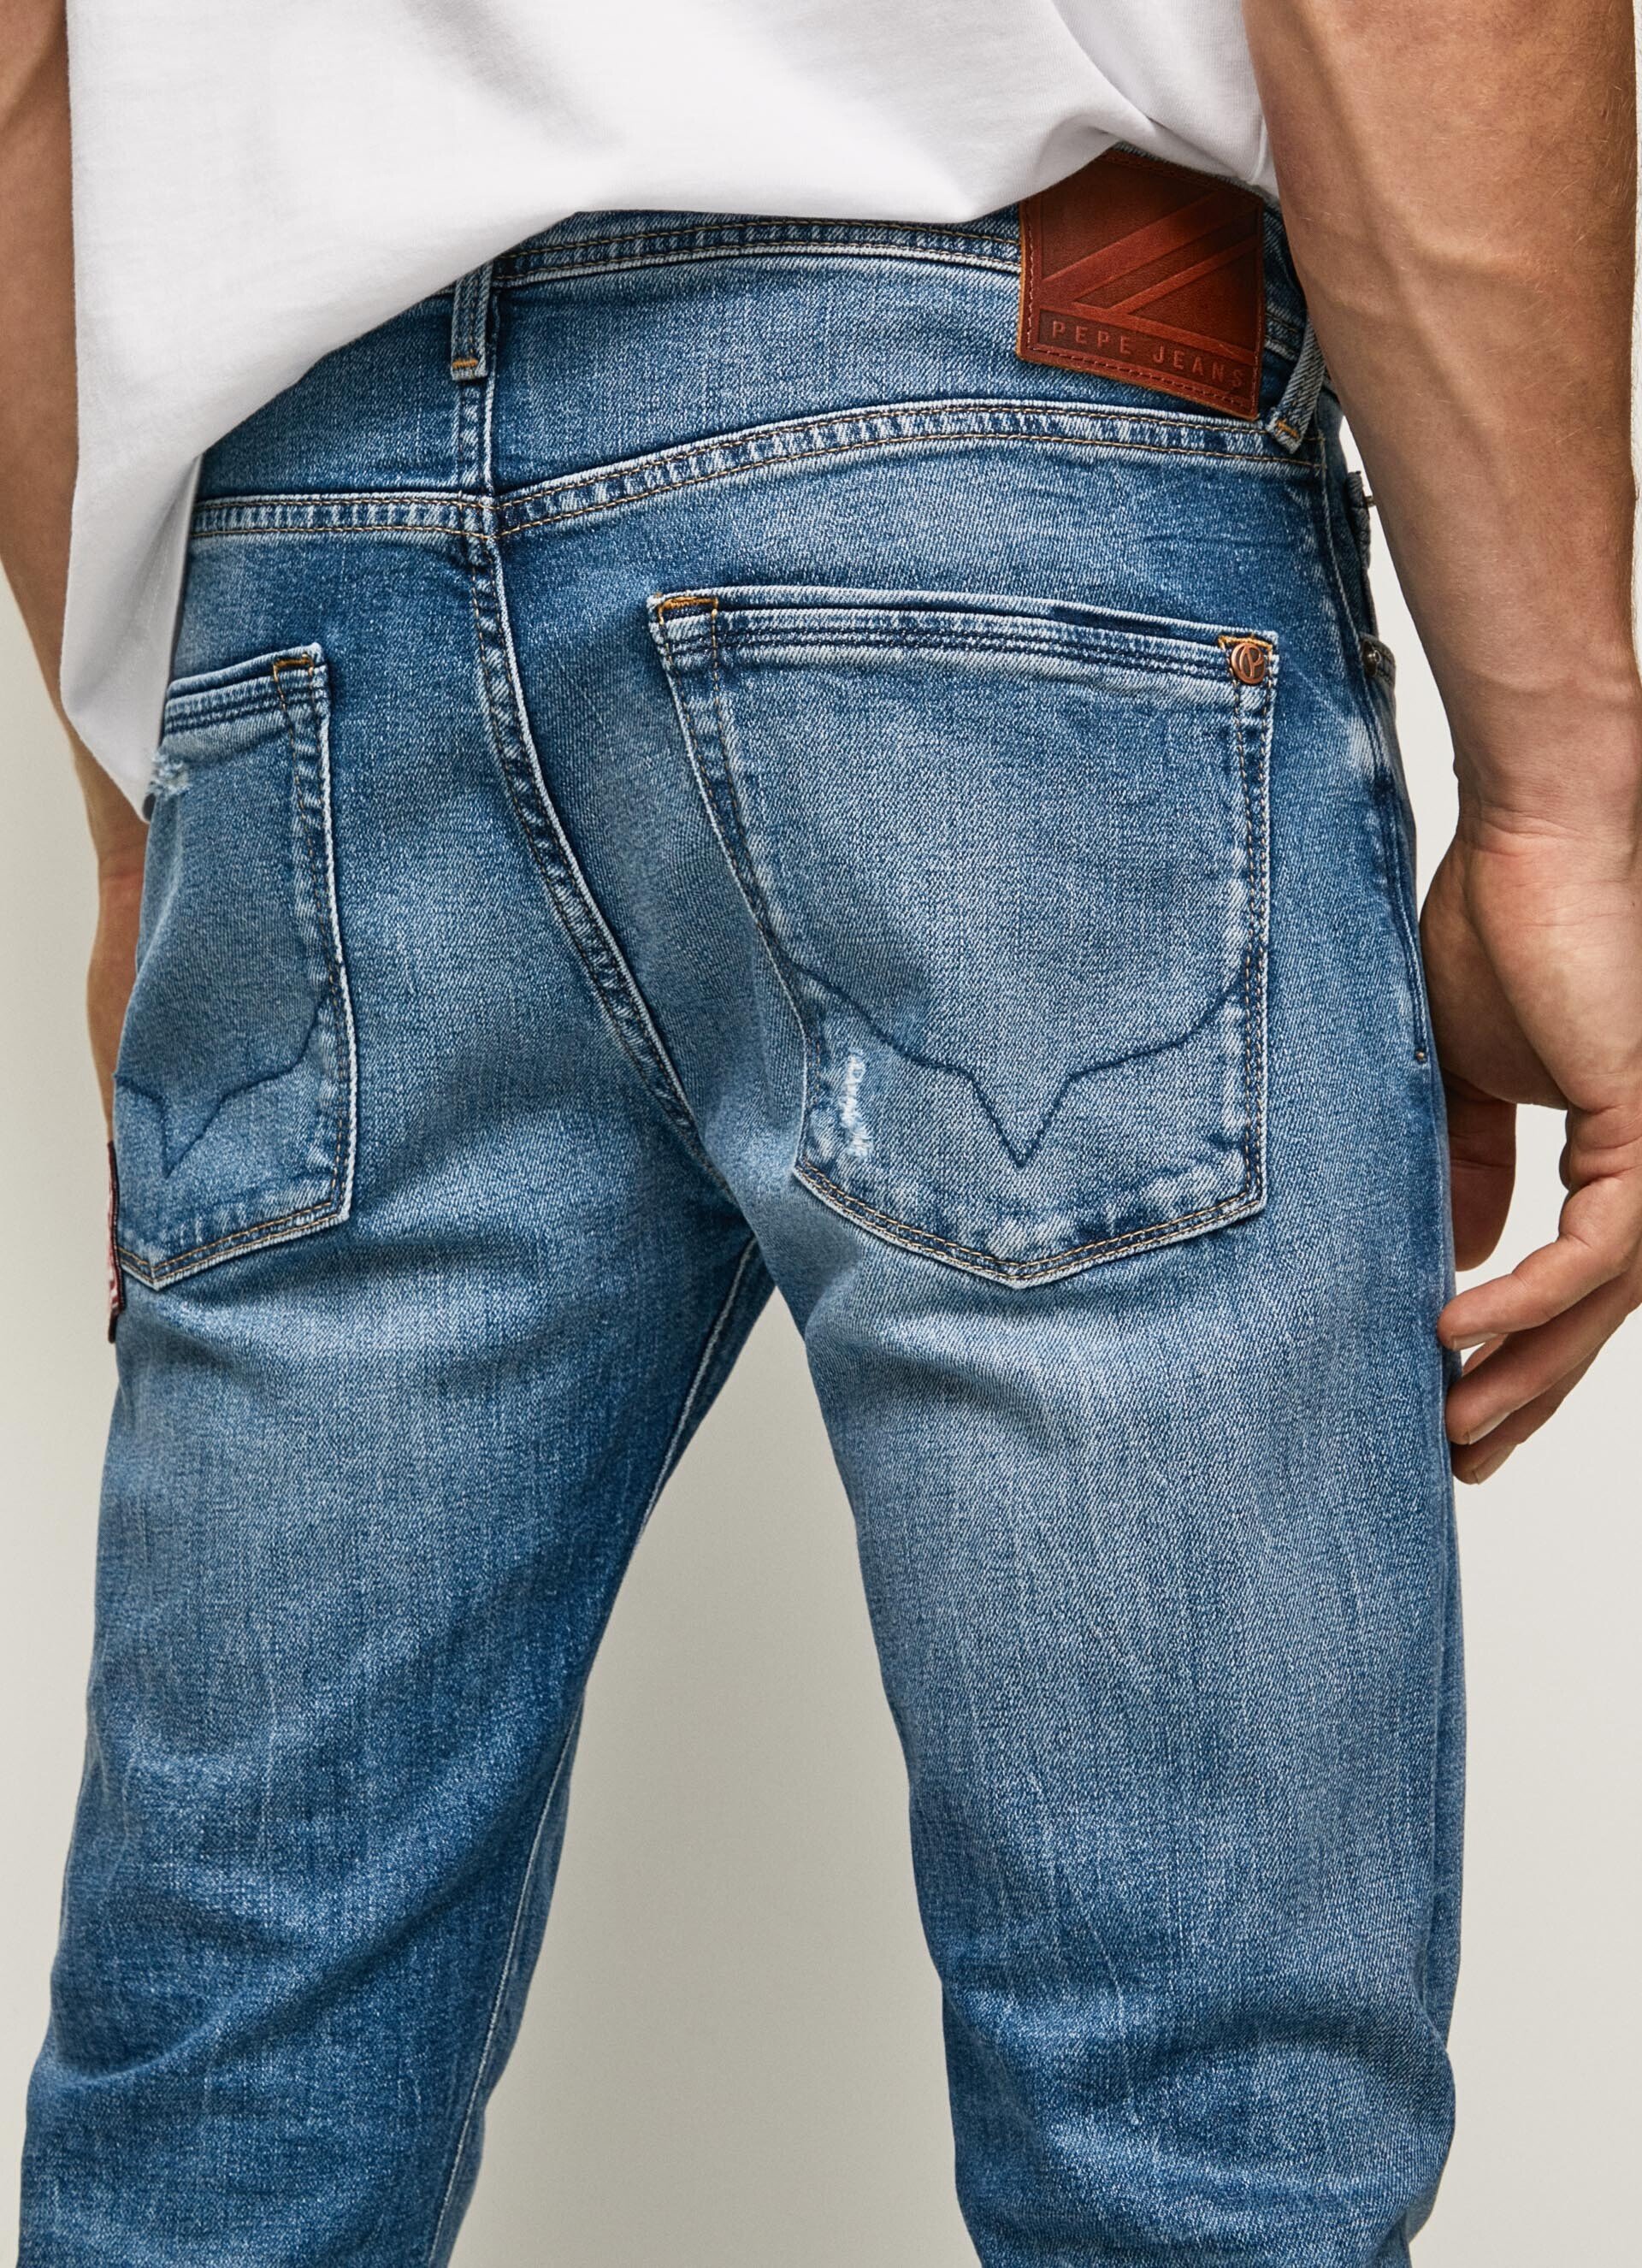 FIT REGULAR ROTOS HOMBRE PEPE JEANS STANLEY STARDUST